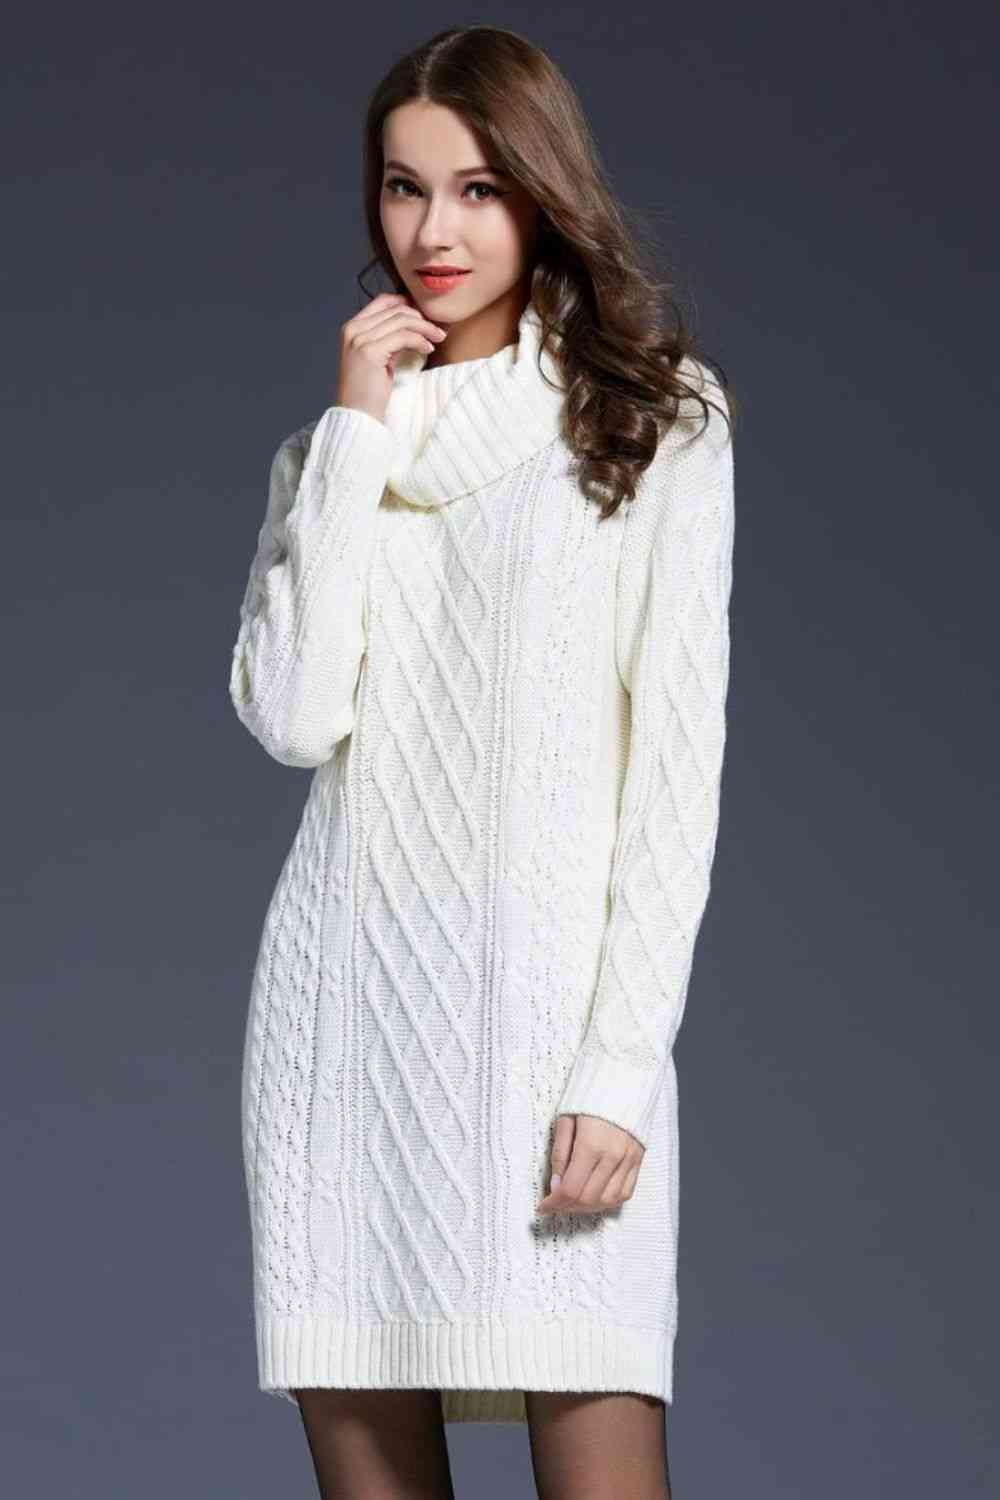 Woven Right Full Size Mixed Knit Cowl Neck Dropped Shoulder Sweater Dress - Sweater Dresses - FITGGINS